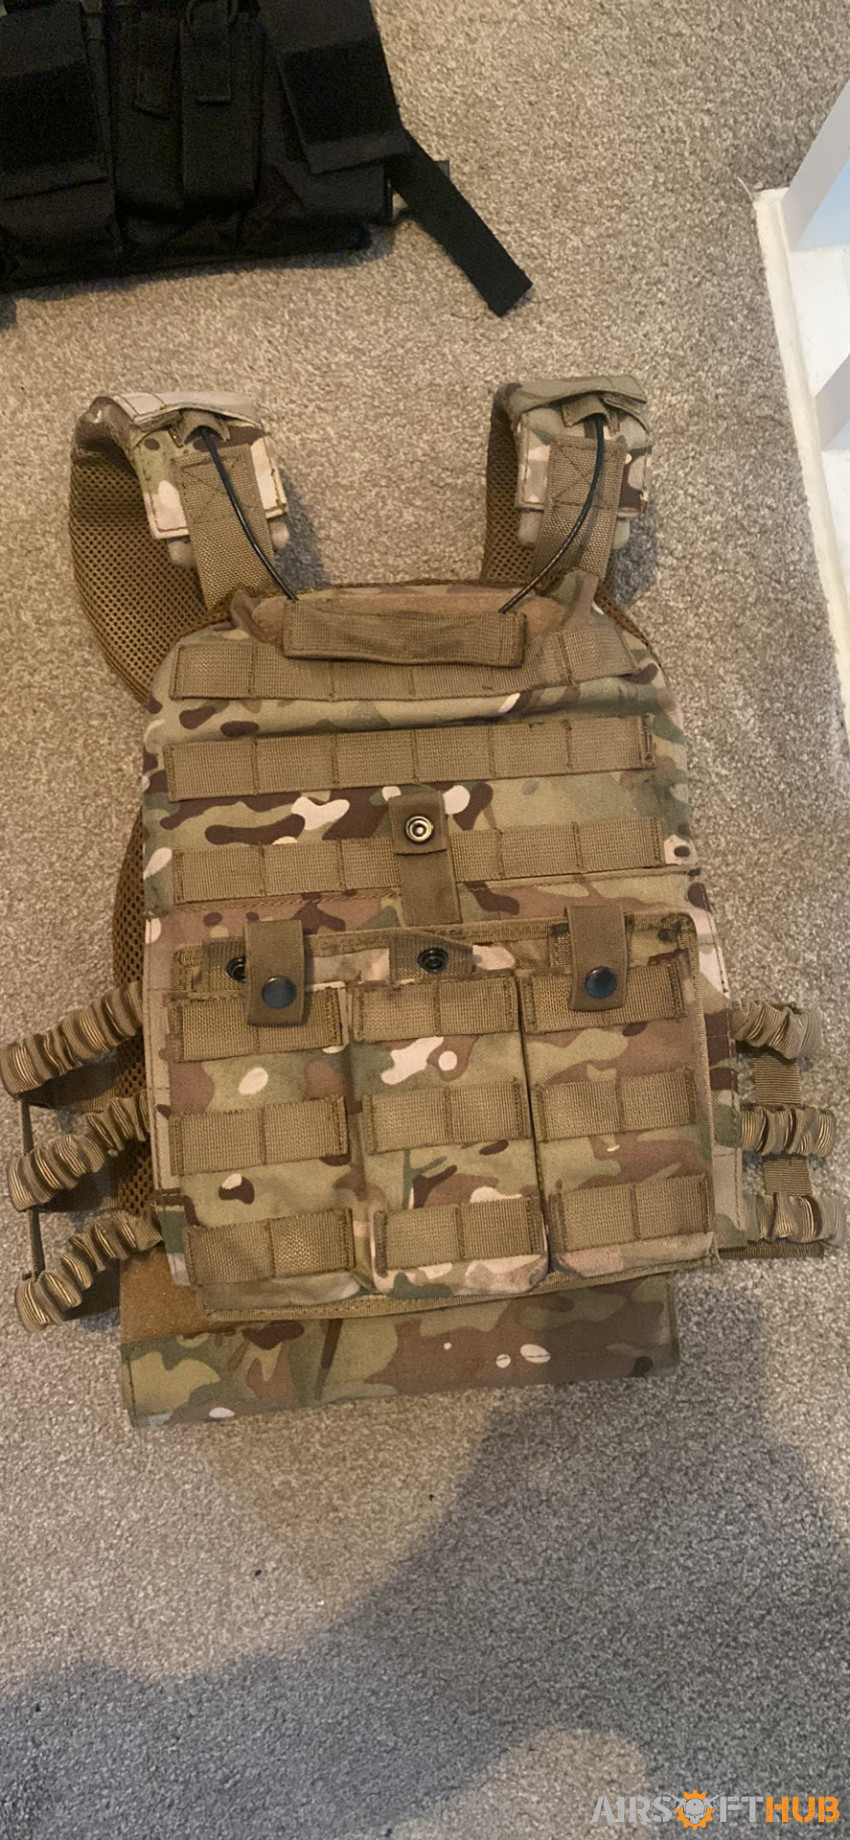 Airsoft kit and equipment - Used airsoft equipment